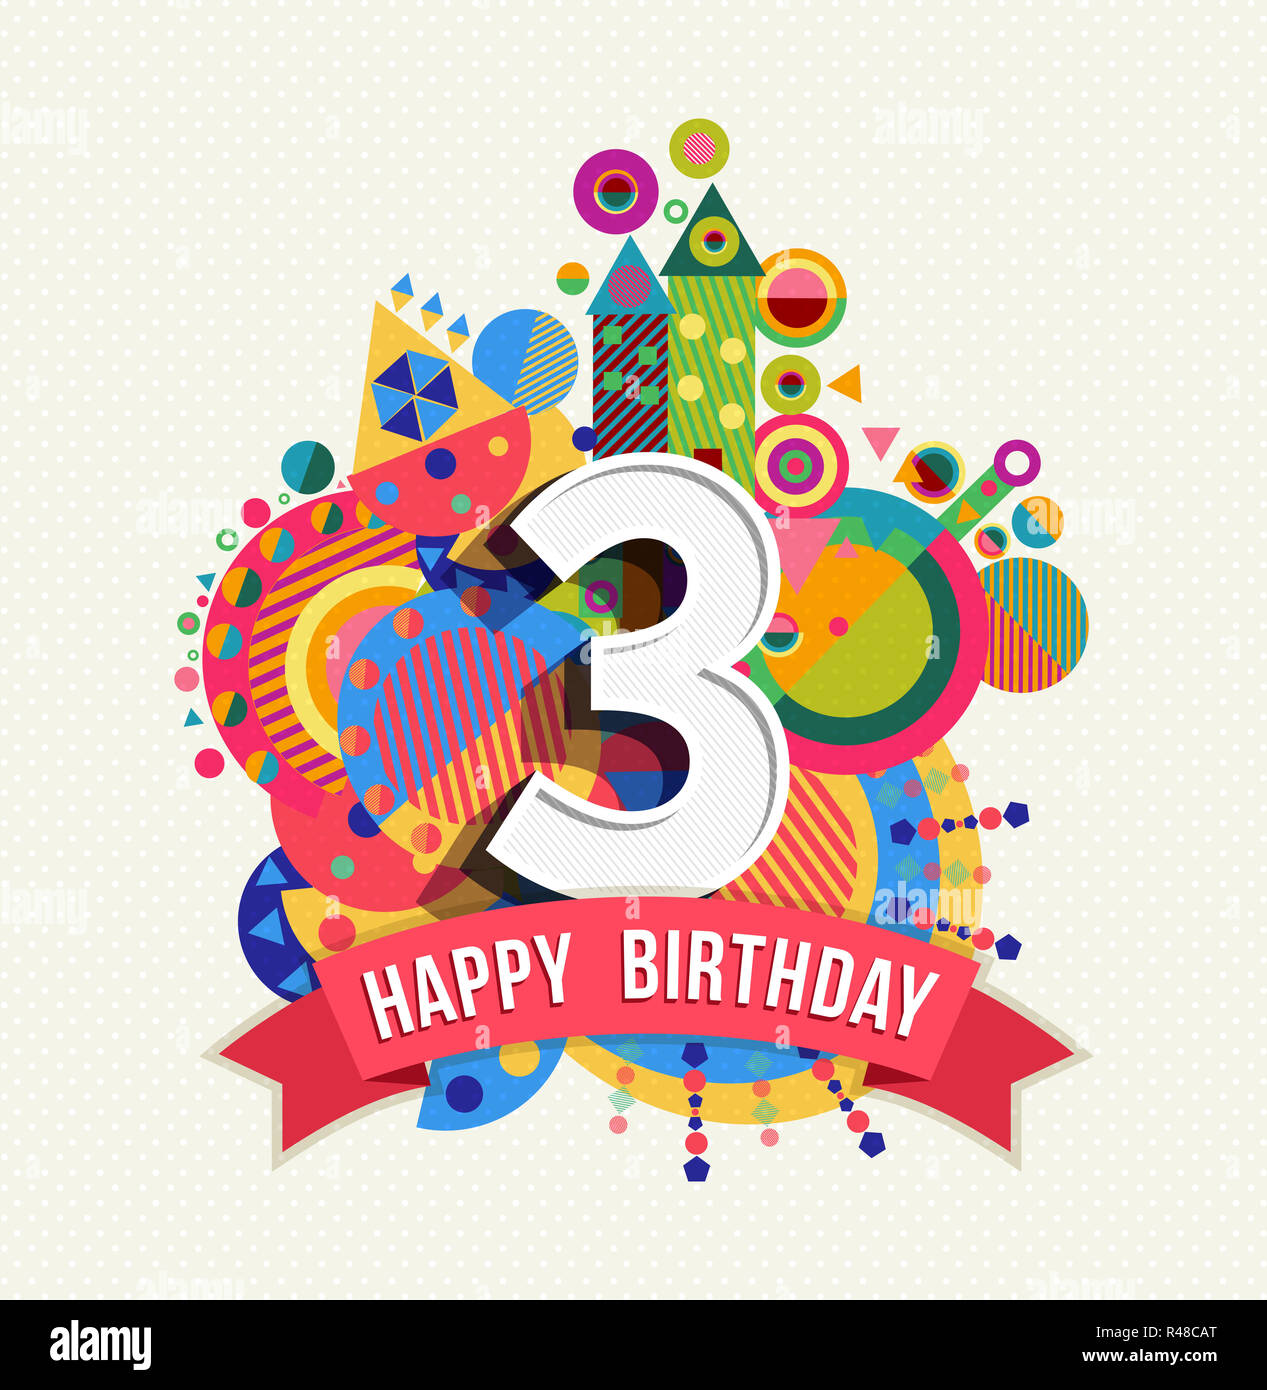 Happy Birthday 3 Year Greeting Card Poster Color Stock Photo Alamy